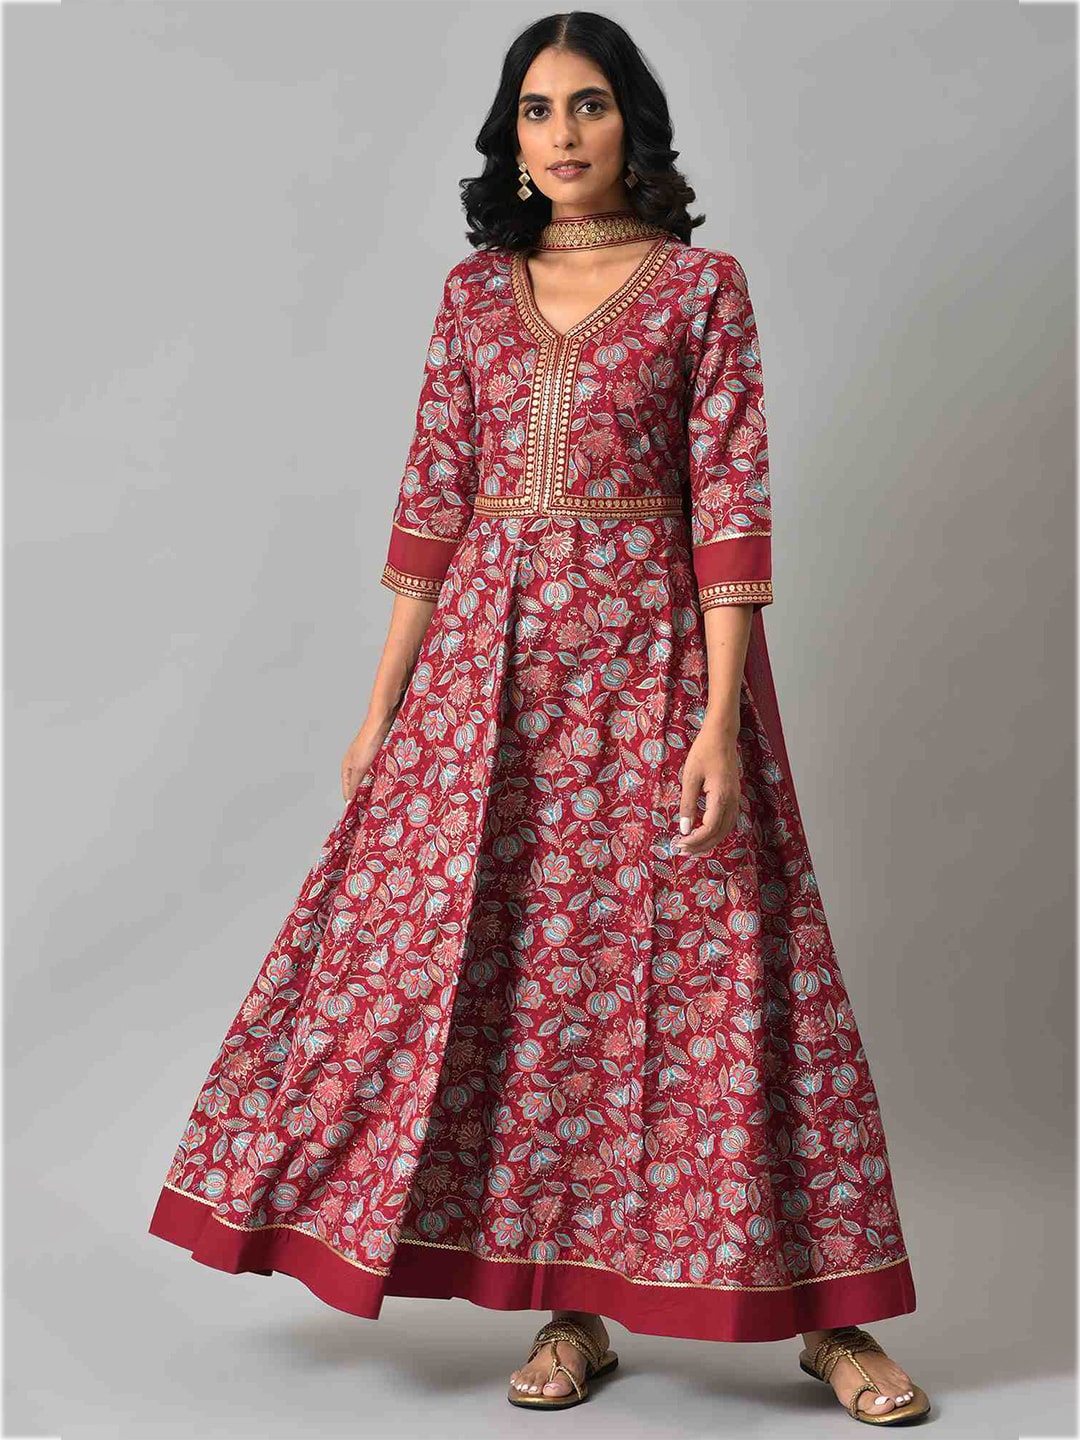 AURELIA Maroon & Gold-Toned Floral Ethnic Maxi Dress with Shawl Price in India